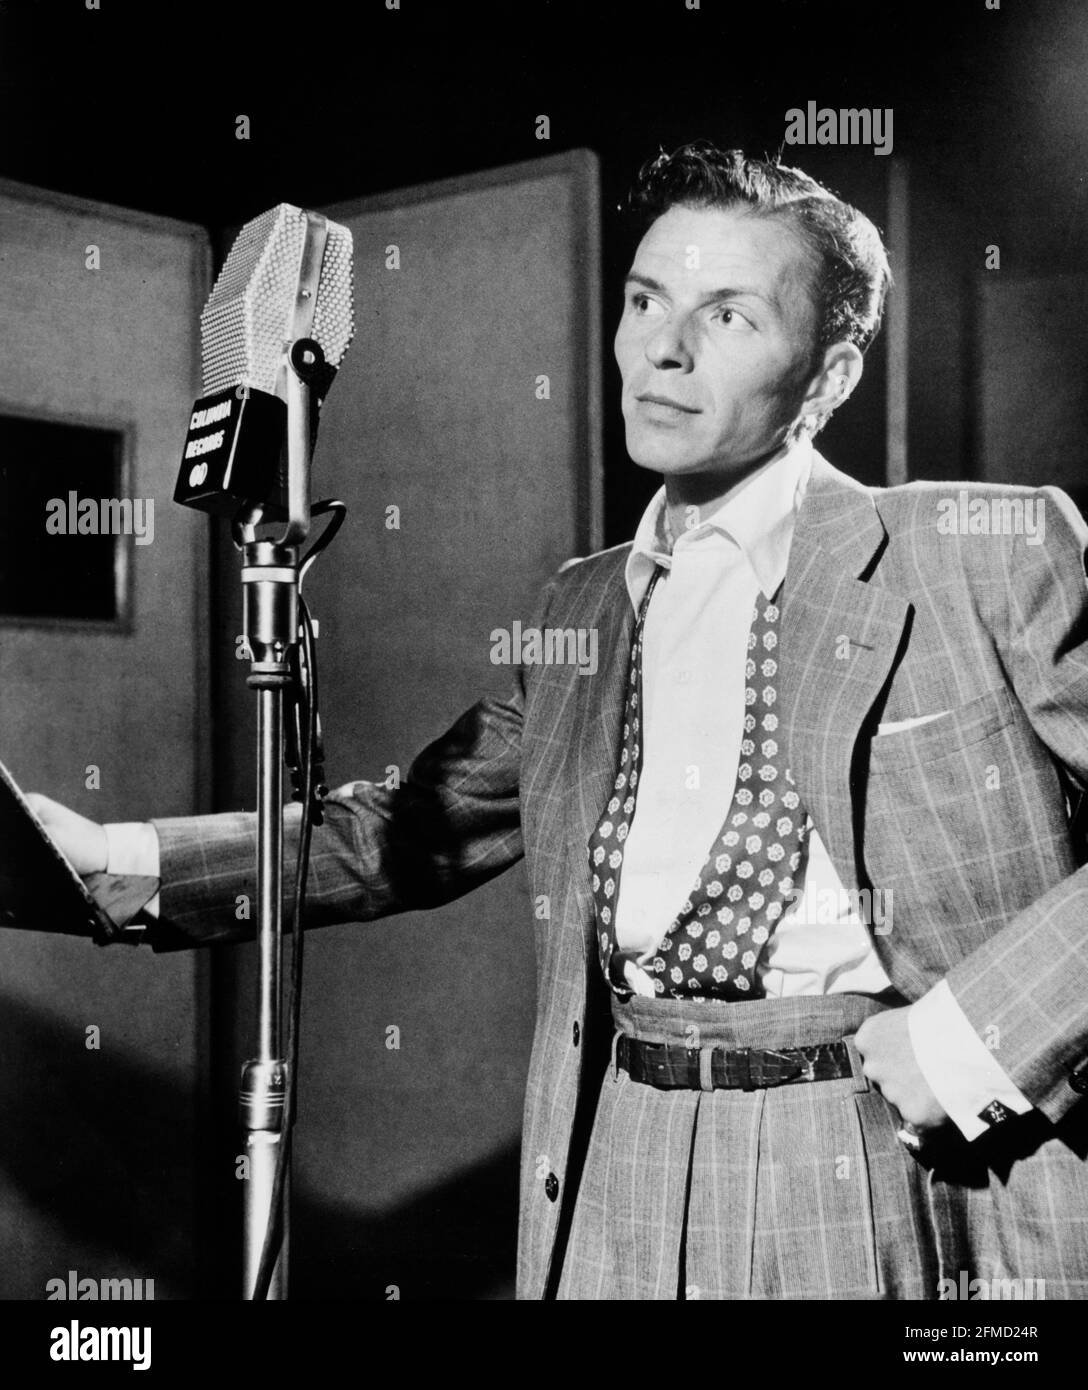 Frank Sinatra with microphone, in the studio, black and white photo by William Gottlieb. Stock Photo